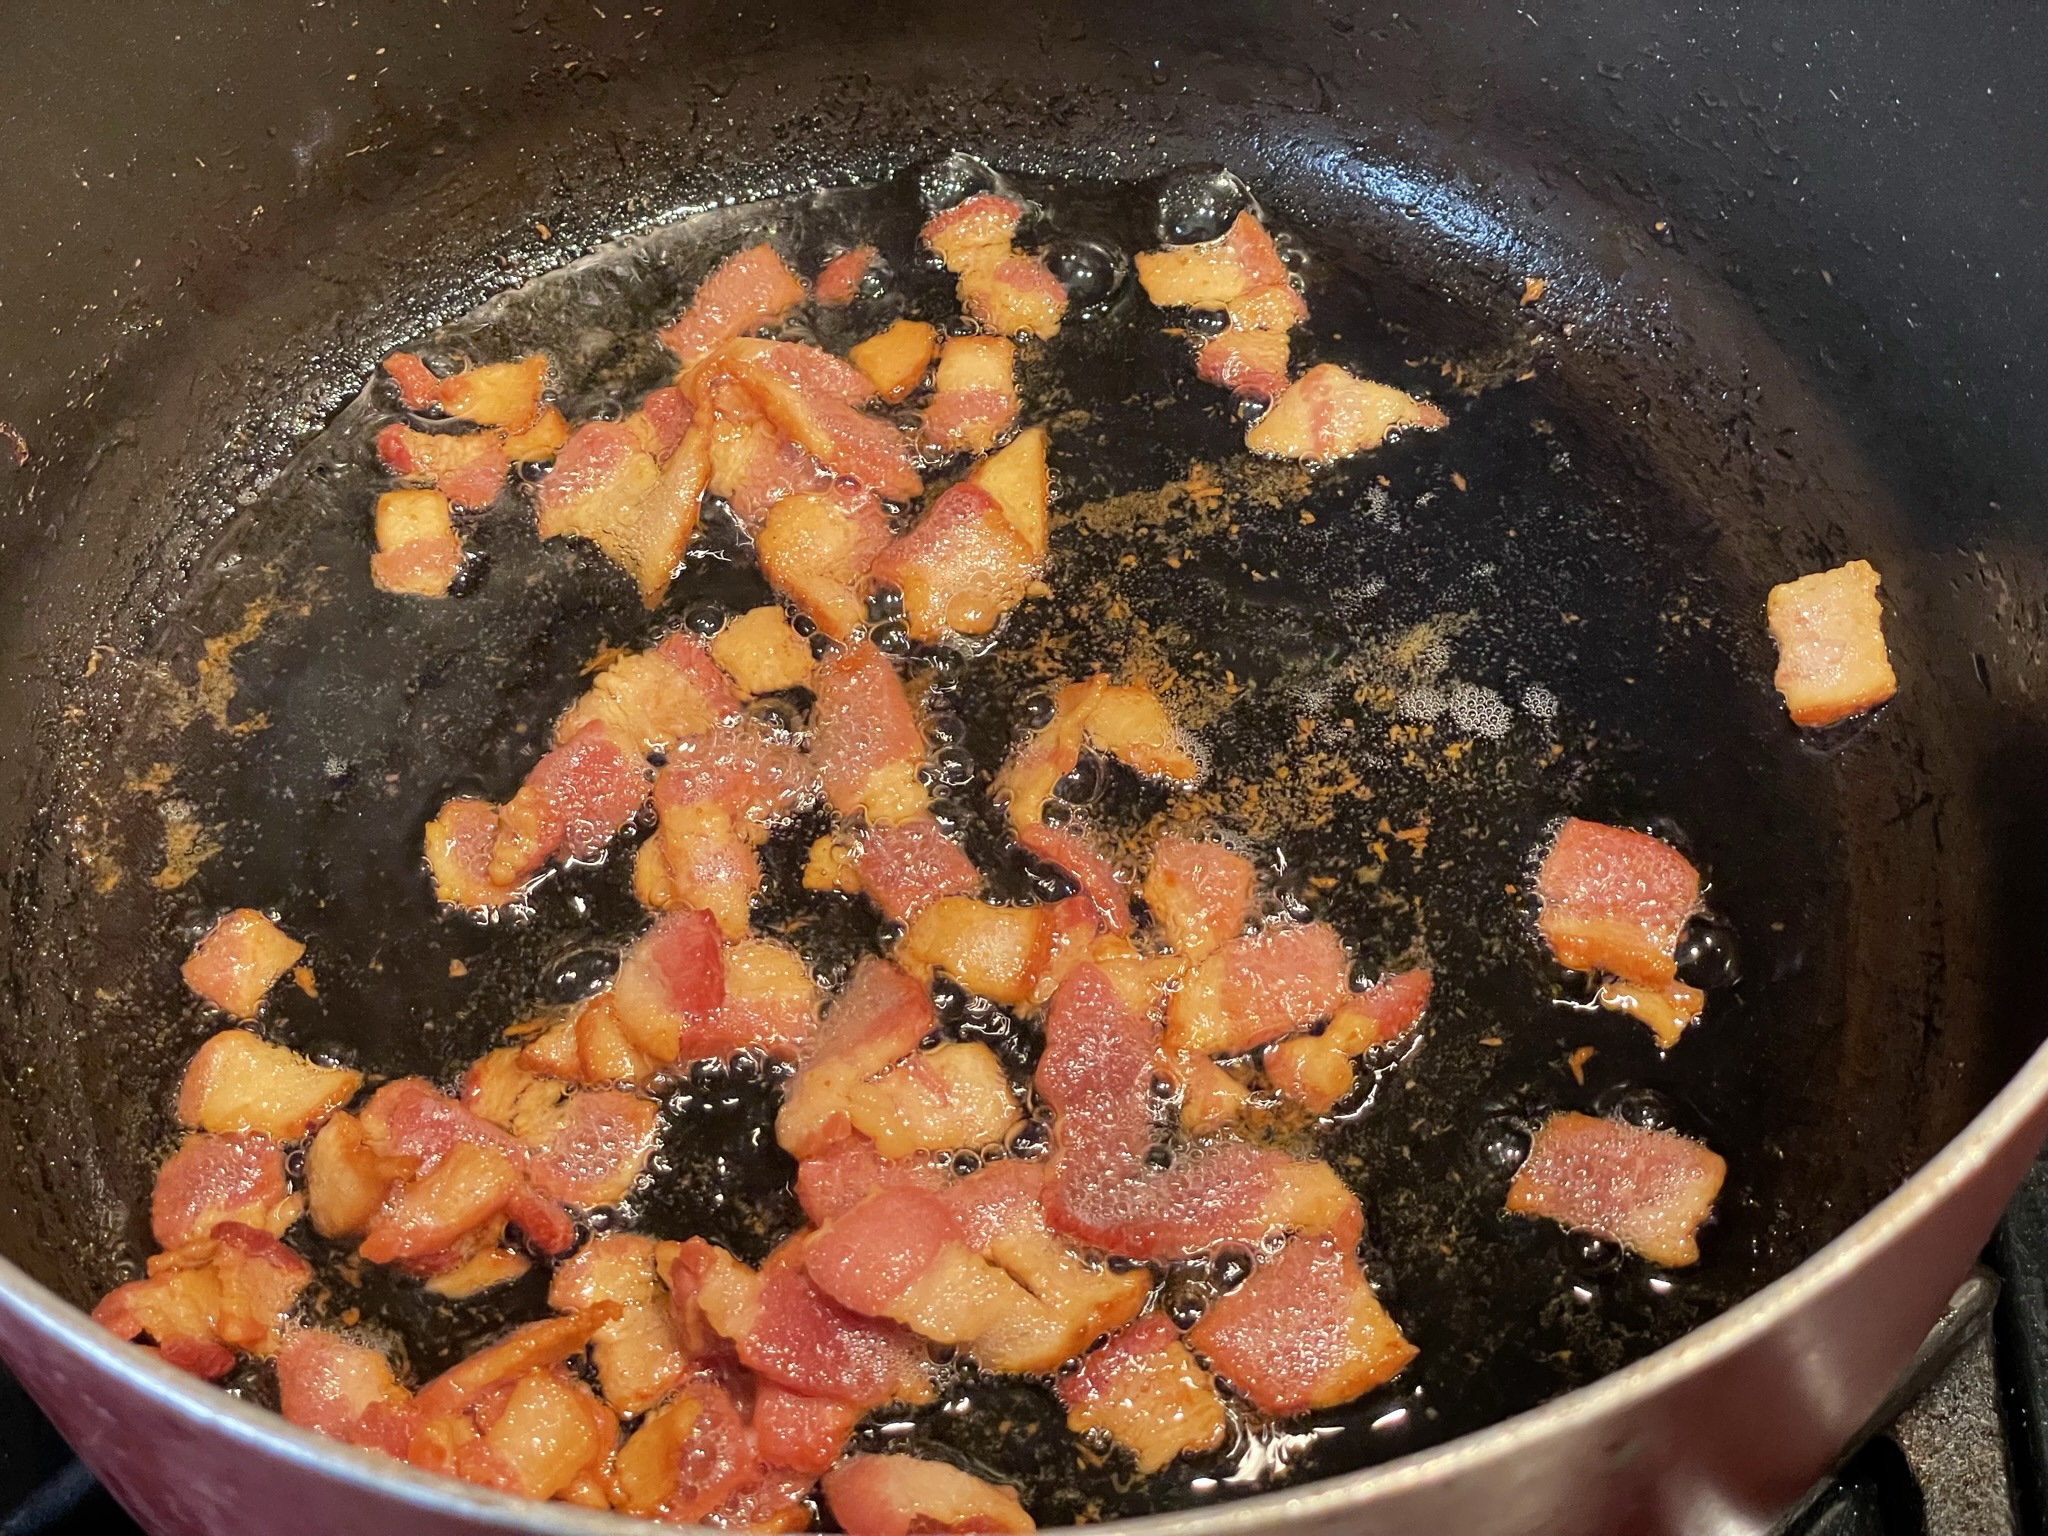 Cook bacon until fat is rendered.